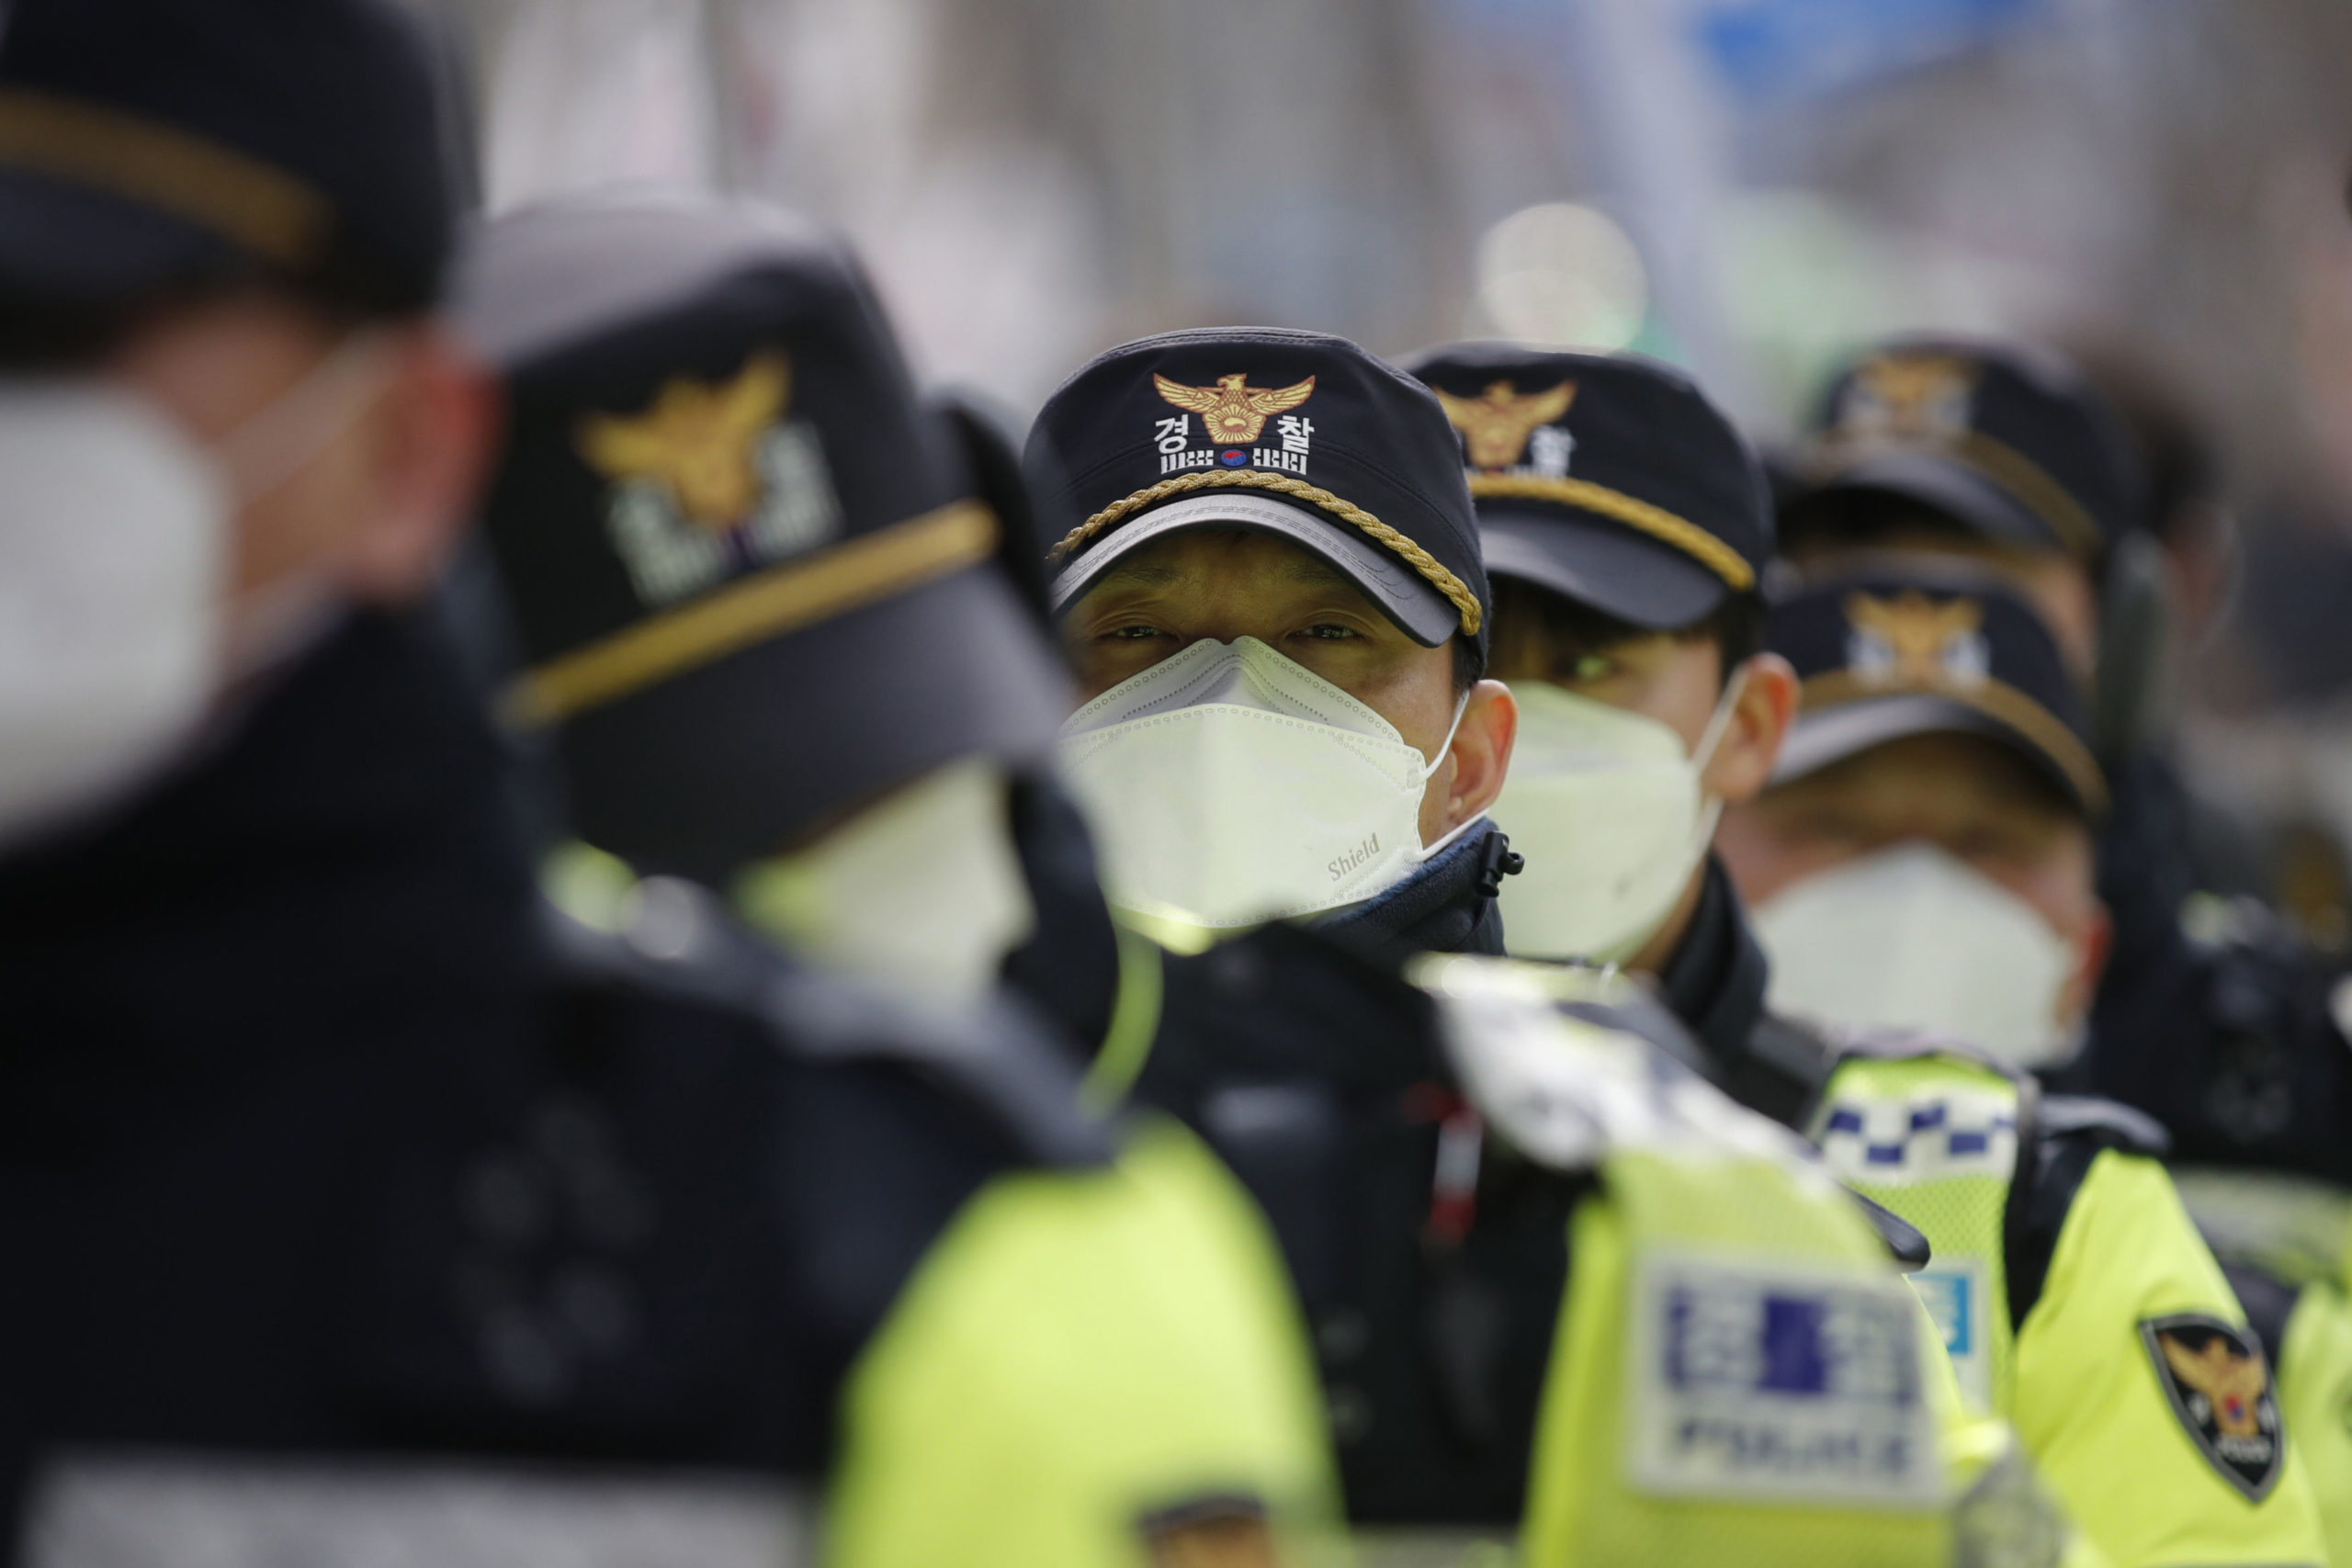 Masked police in Seoul, South Korea yesterday